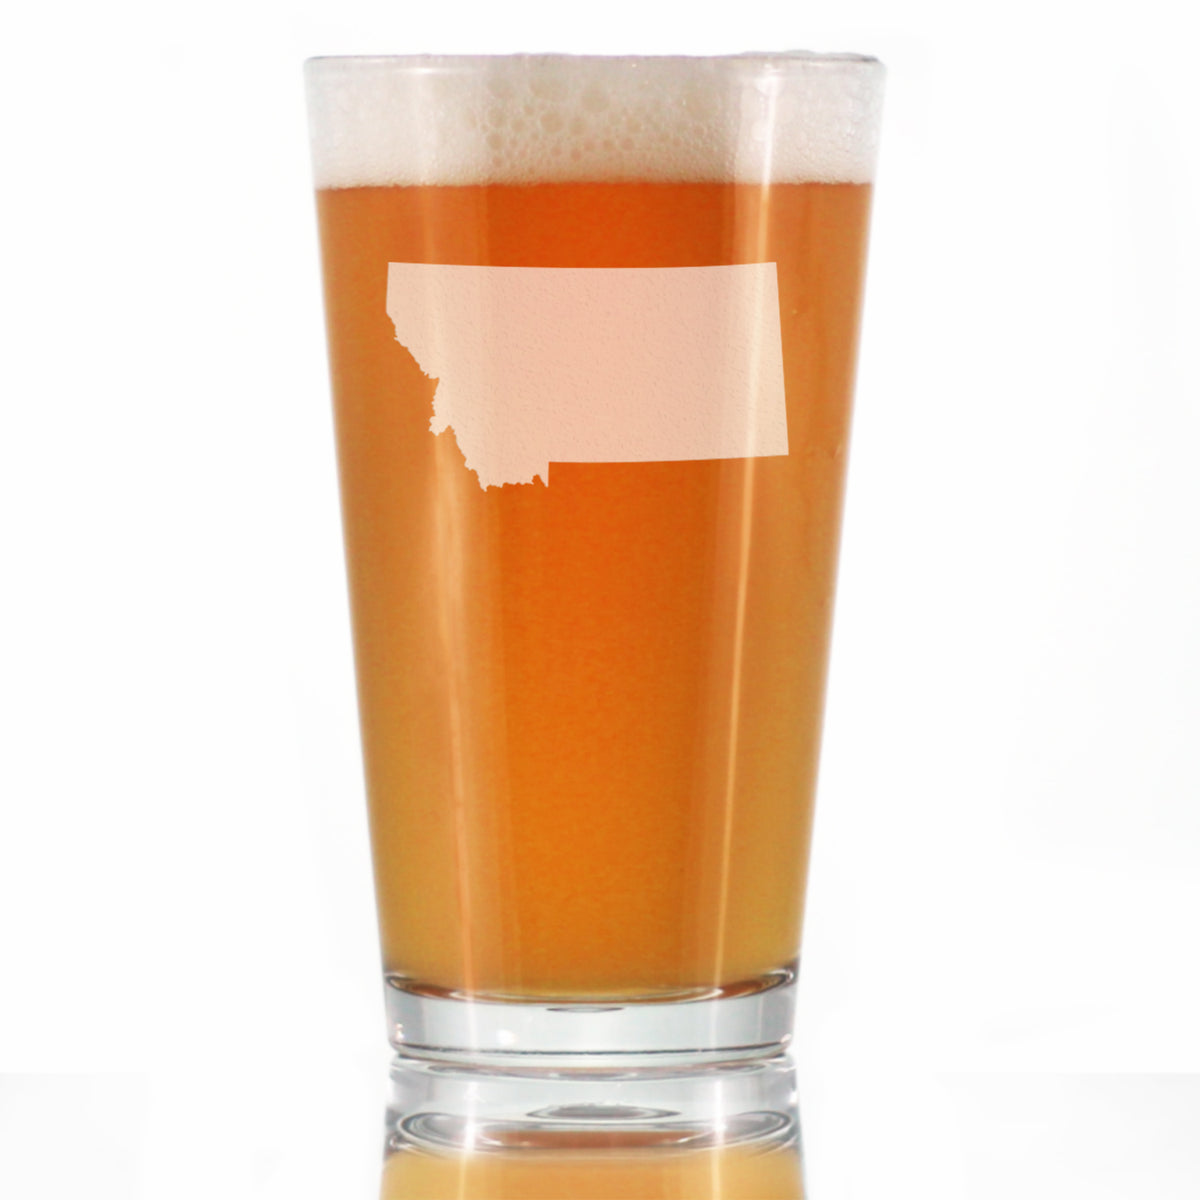 Montana State Outline Pint Glass for Beer - State Themed Drinking Decor and Gifts for Montanan Women &amp; Men - 16 Oz Glasses